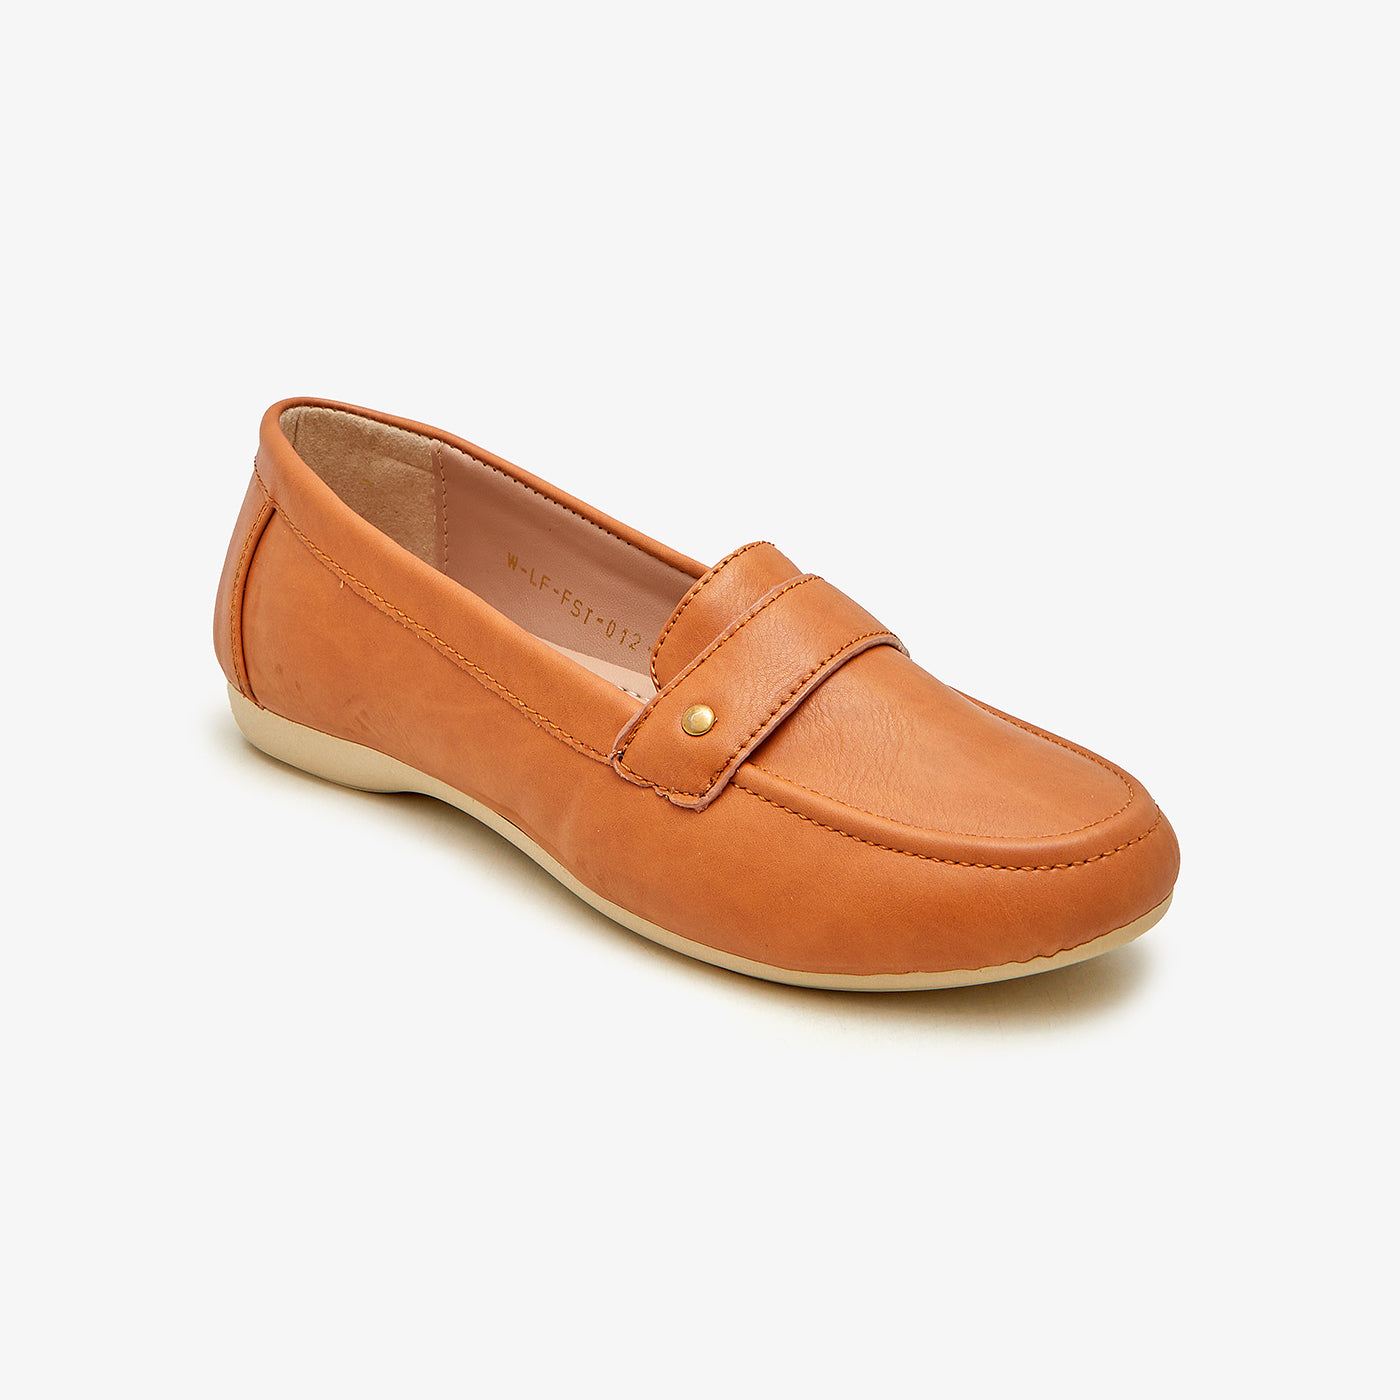 Women's Stitched Strapped Moccs